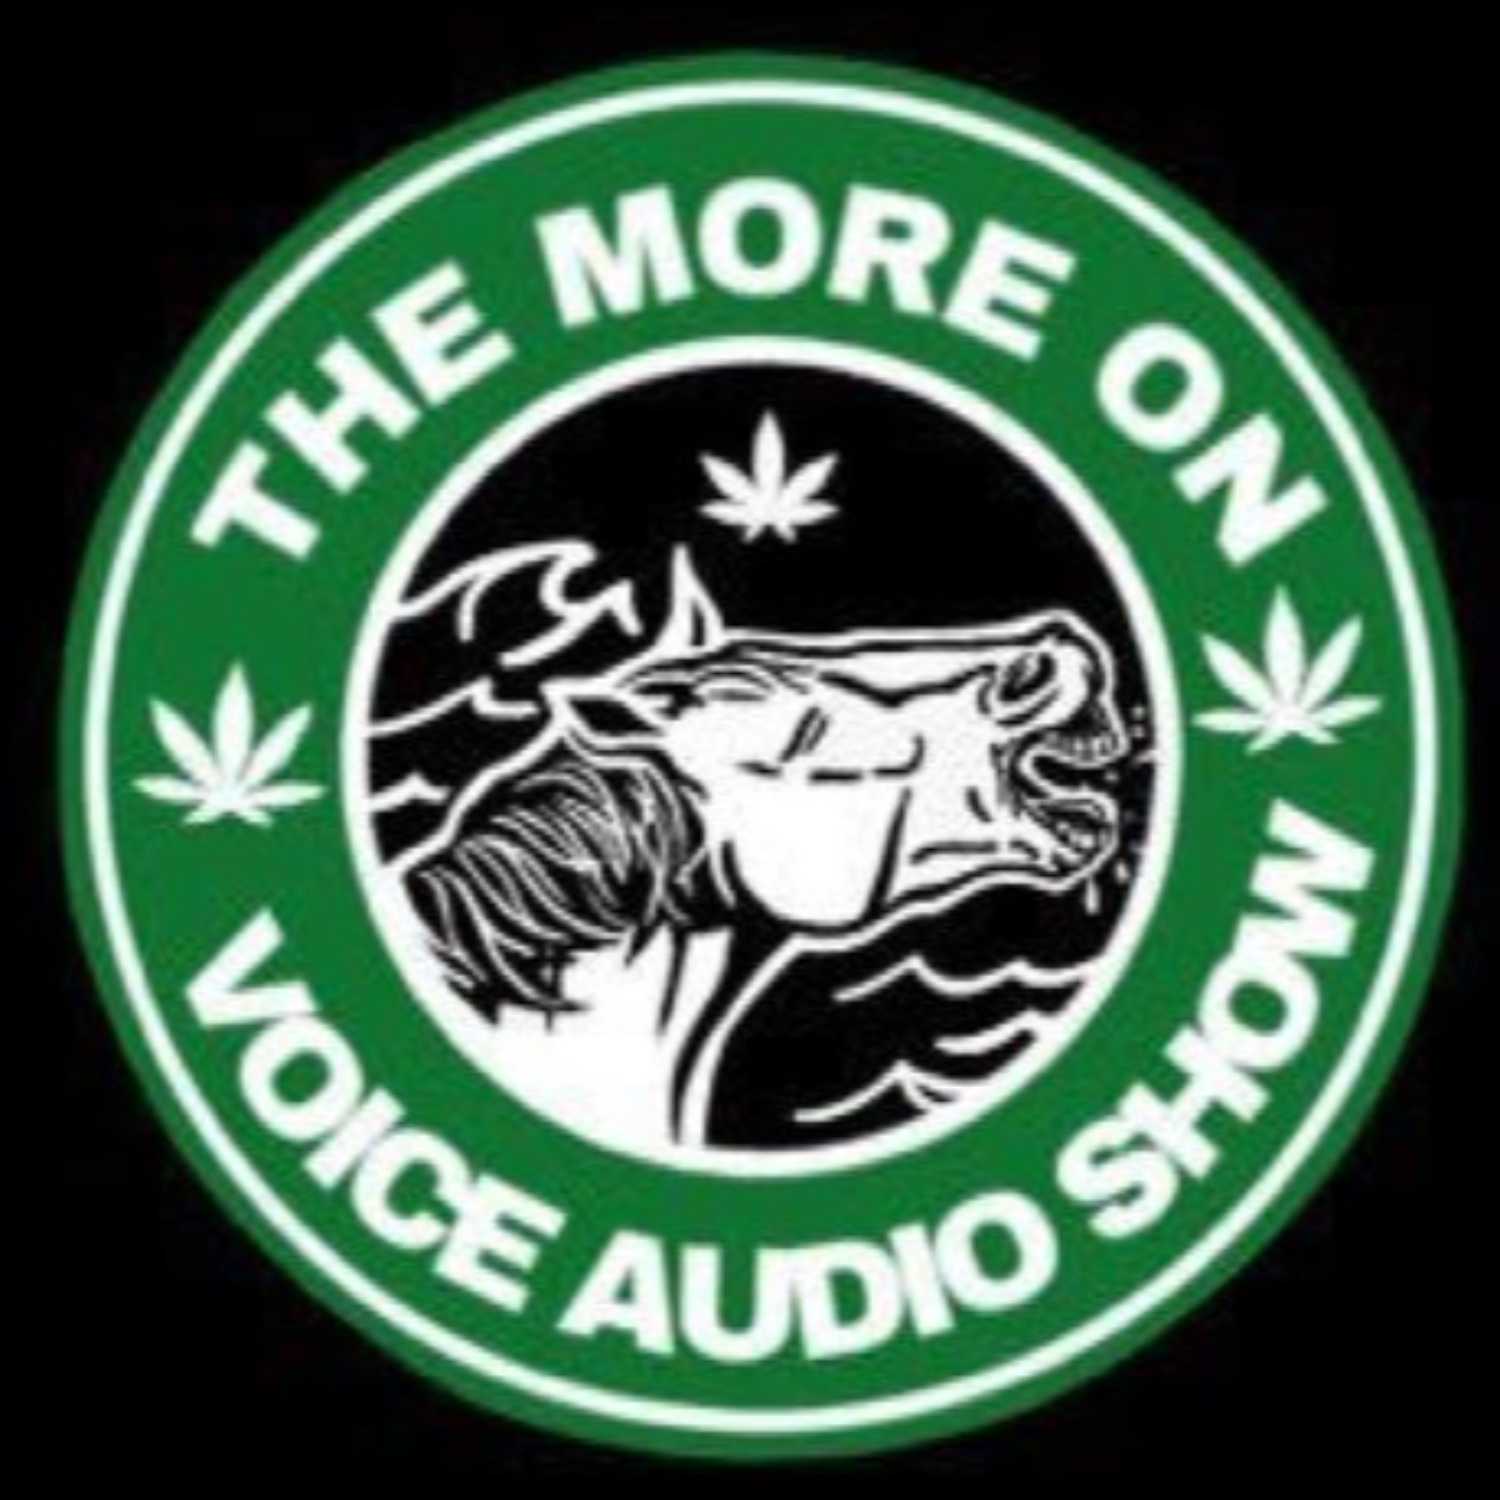 The More On Voice Audio Show: Episode 51 (Pat & Jack)